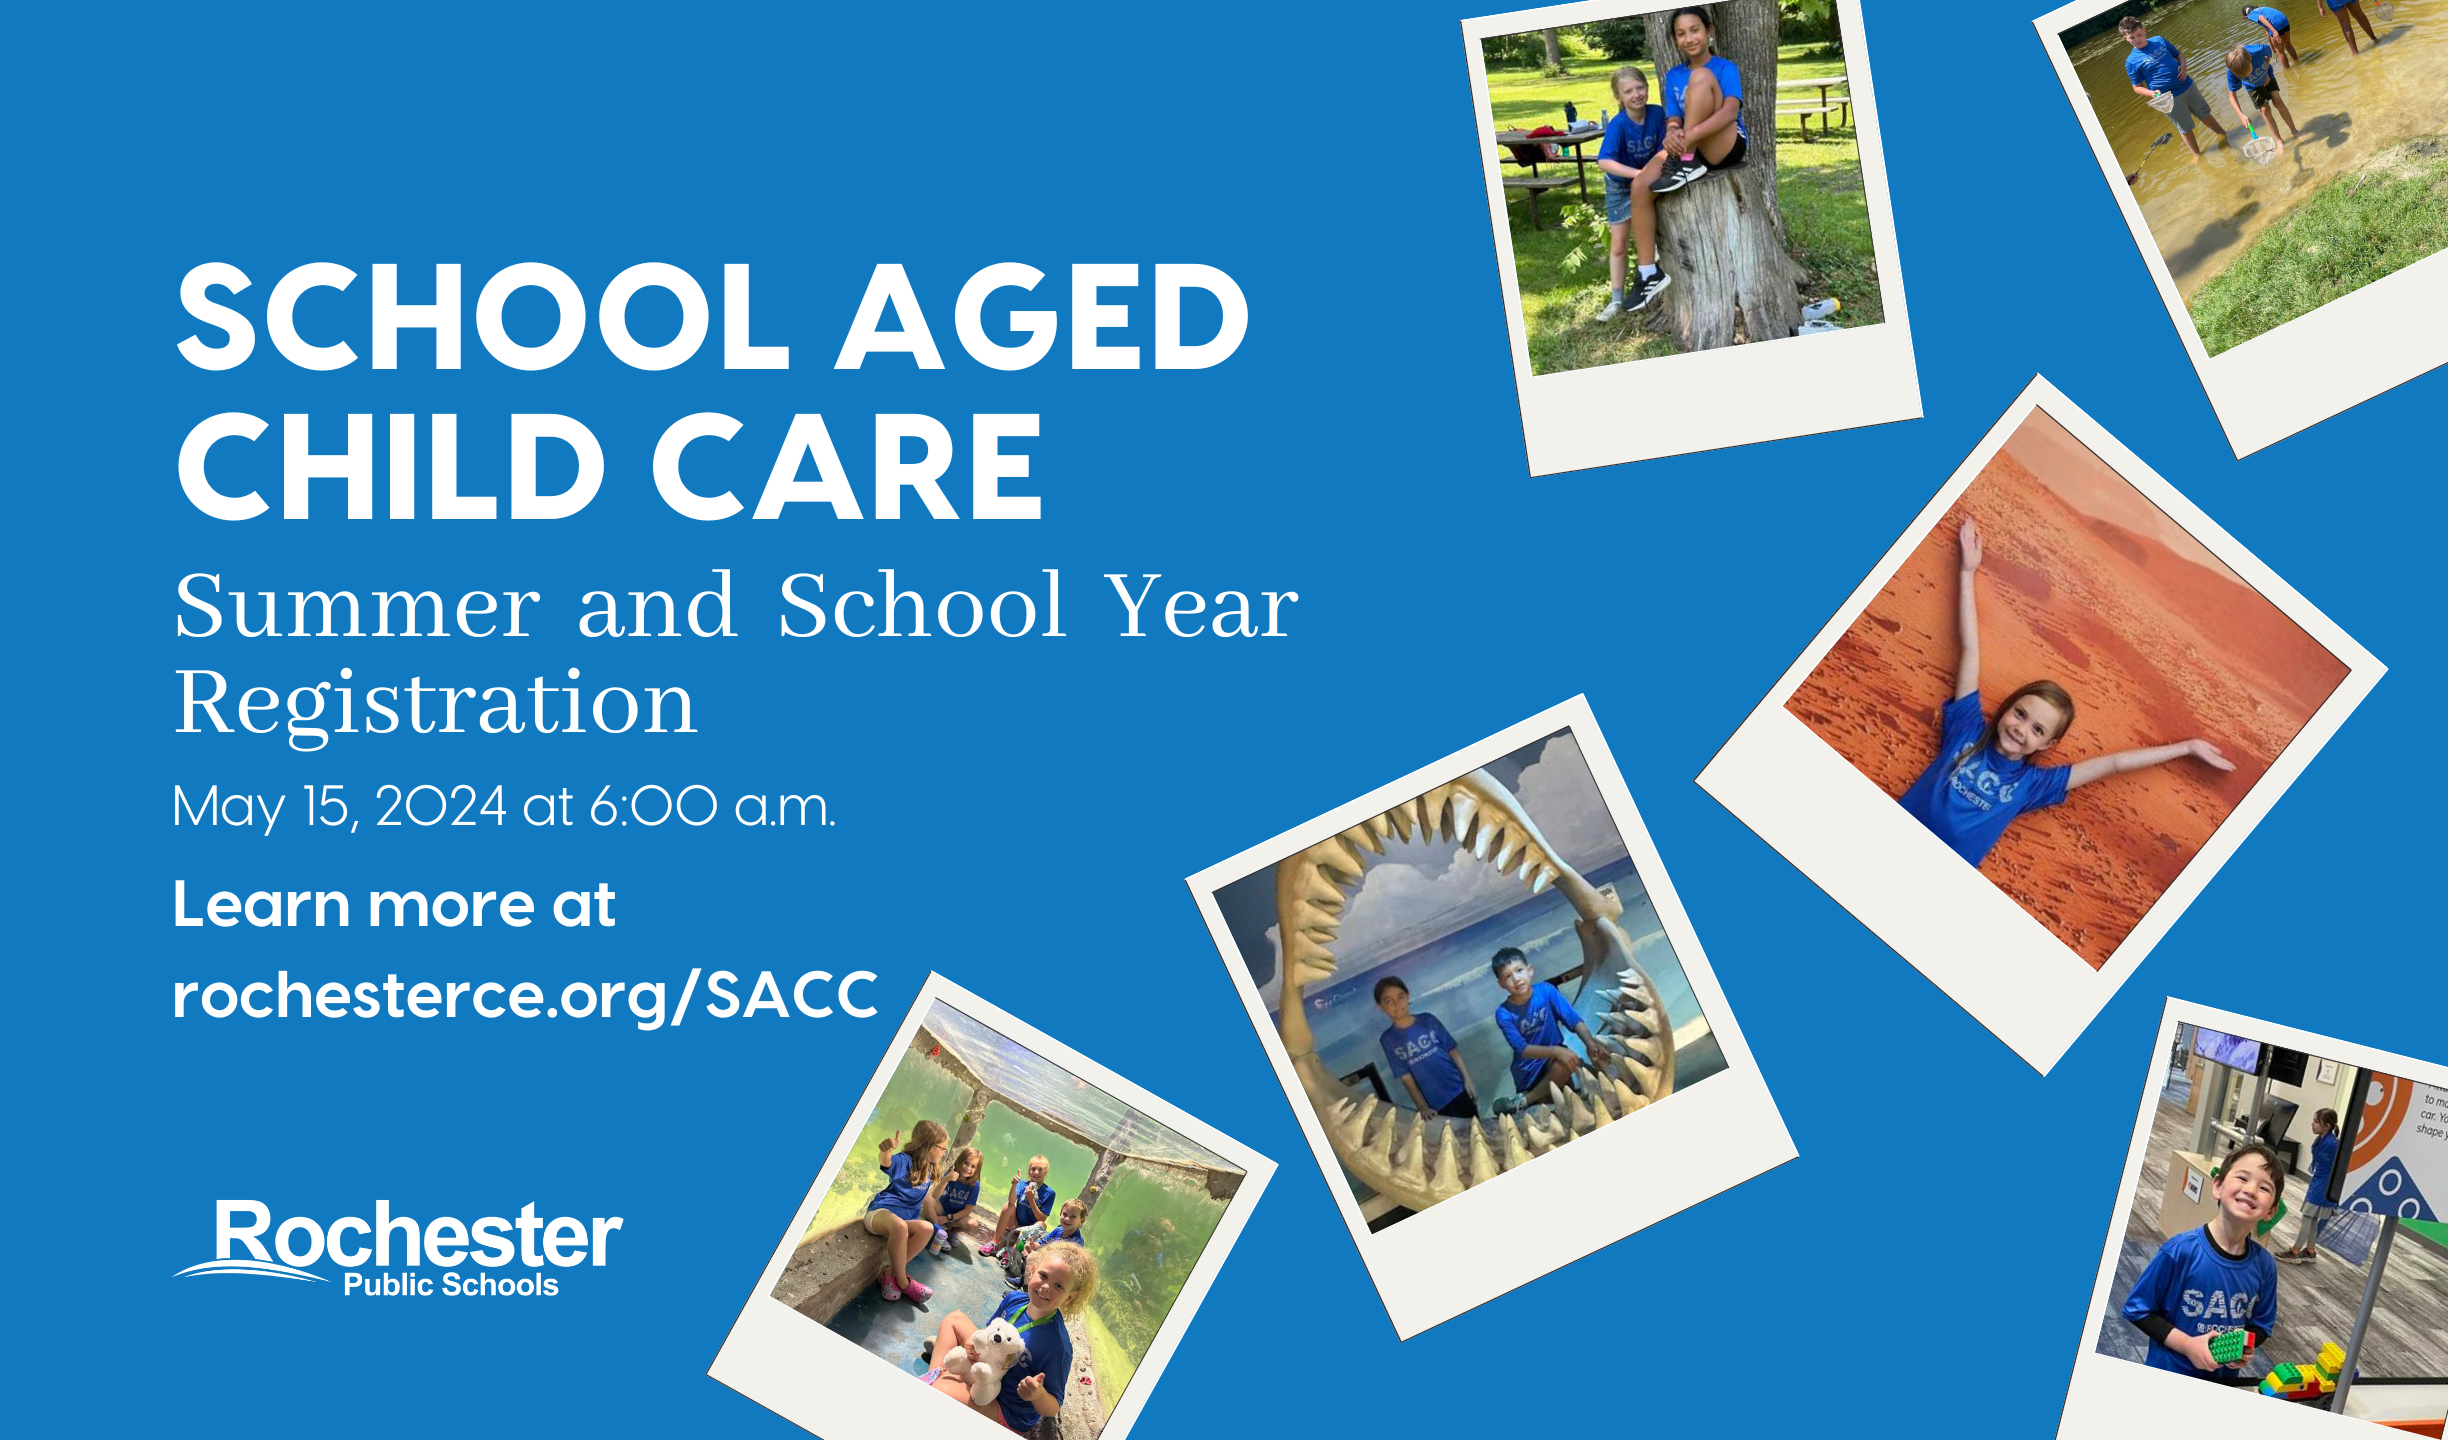 School Aged Child Care Summer Registration starting May 15 at 6:00 a.m. 